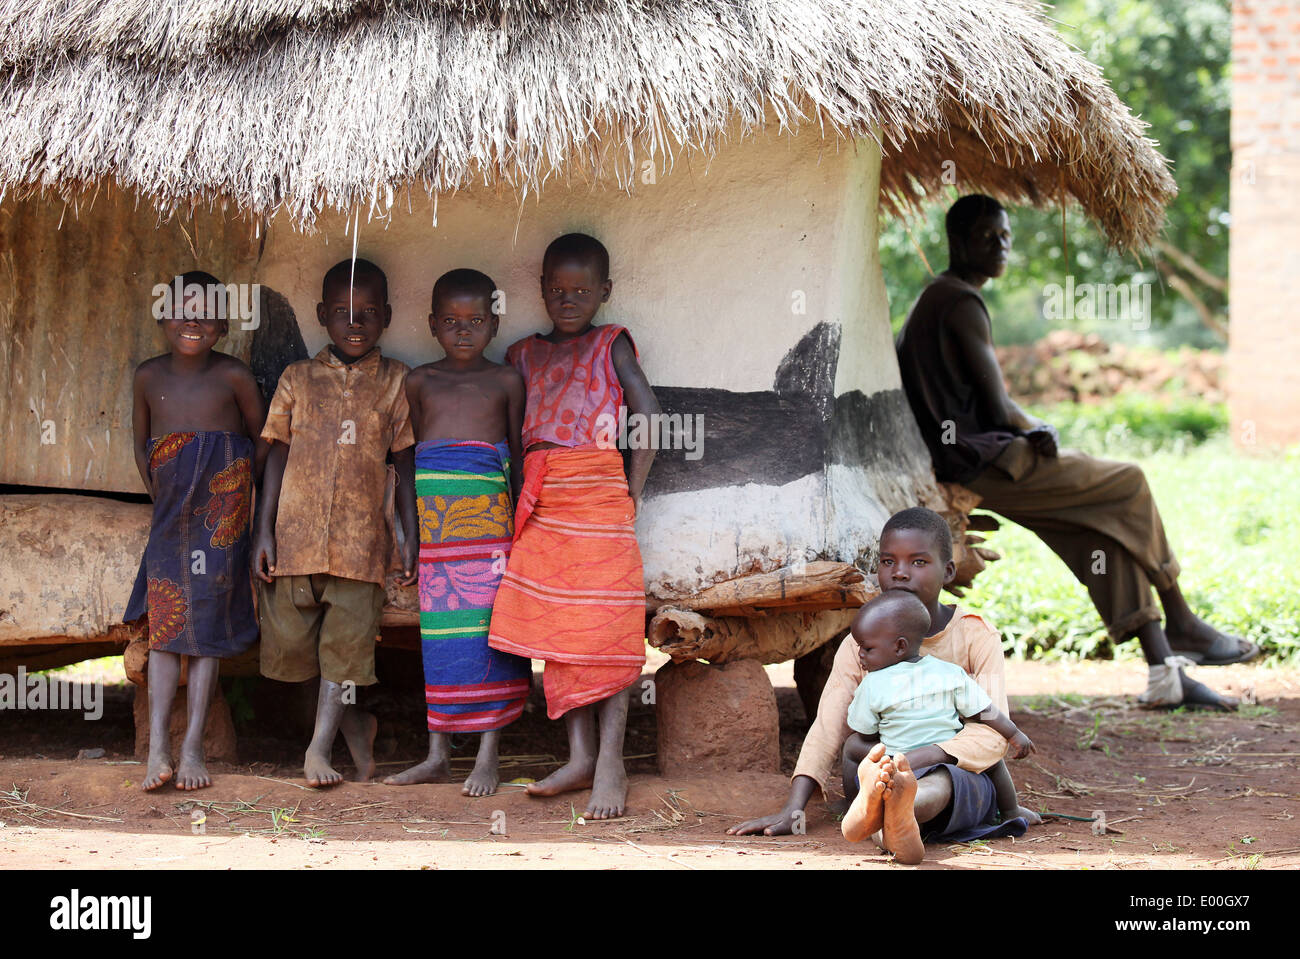 Villagers in a rural area of the Lira district in northern Uganda. Stock Photo